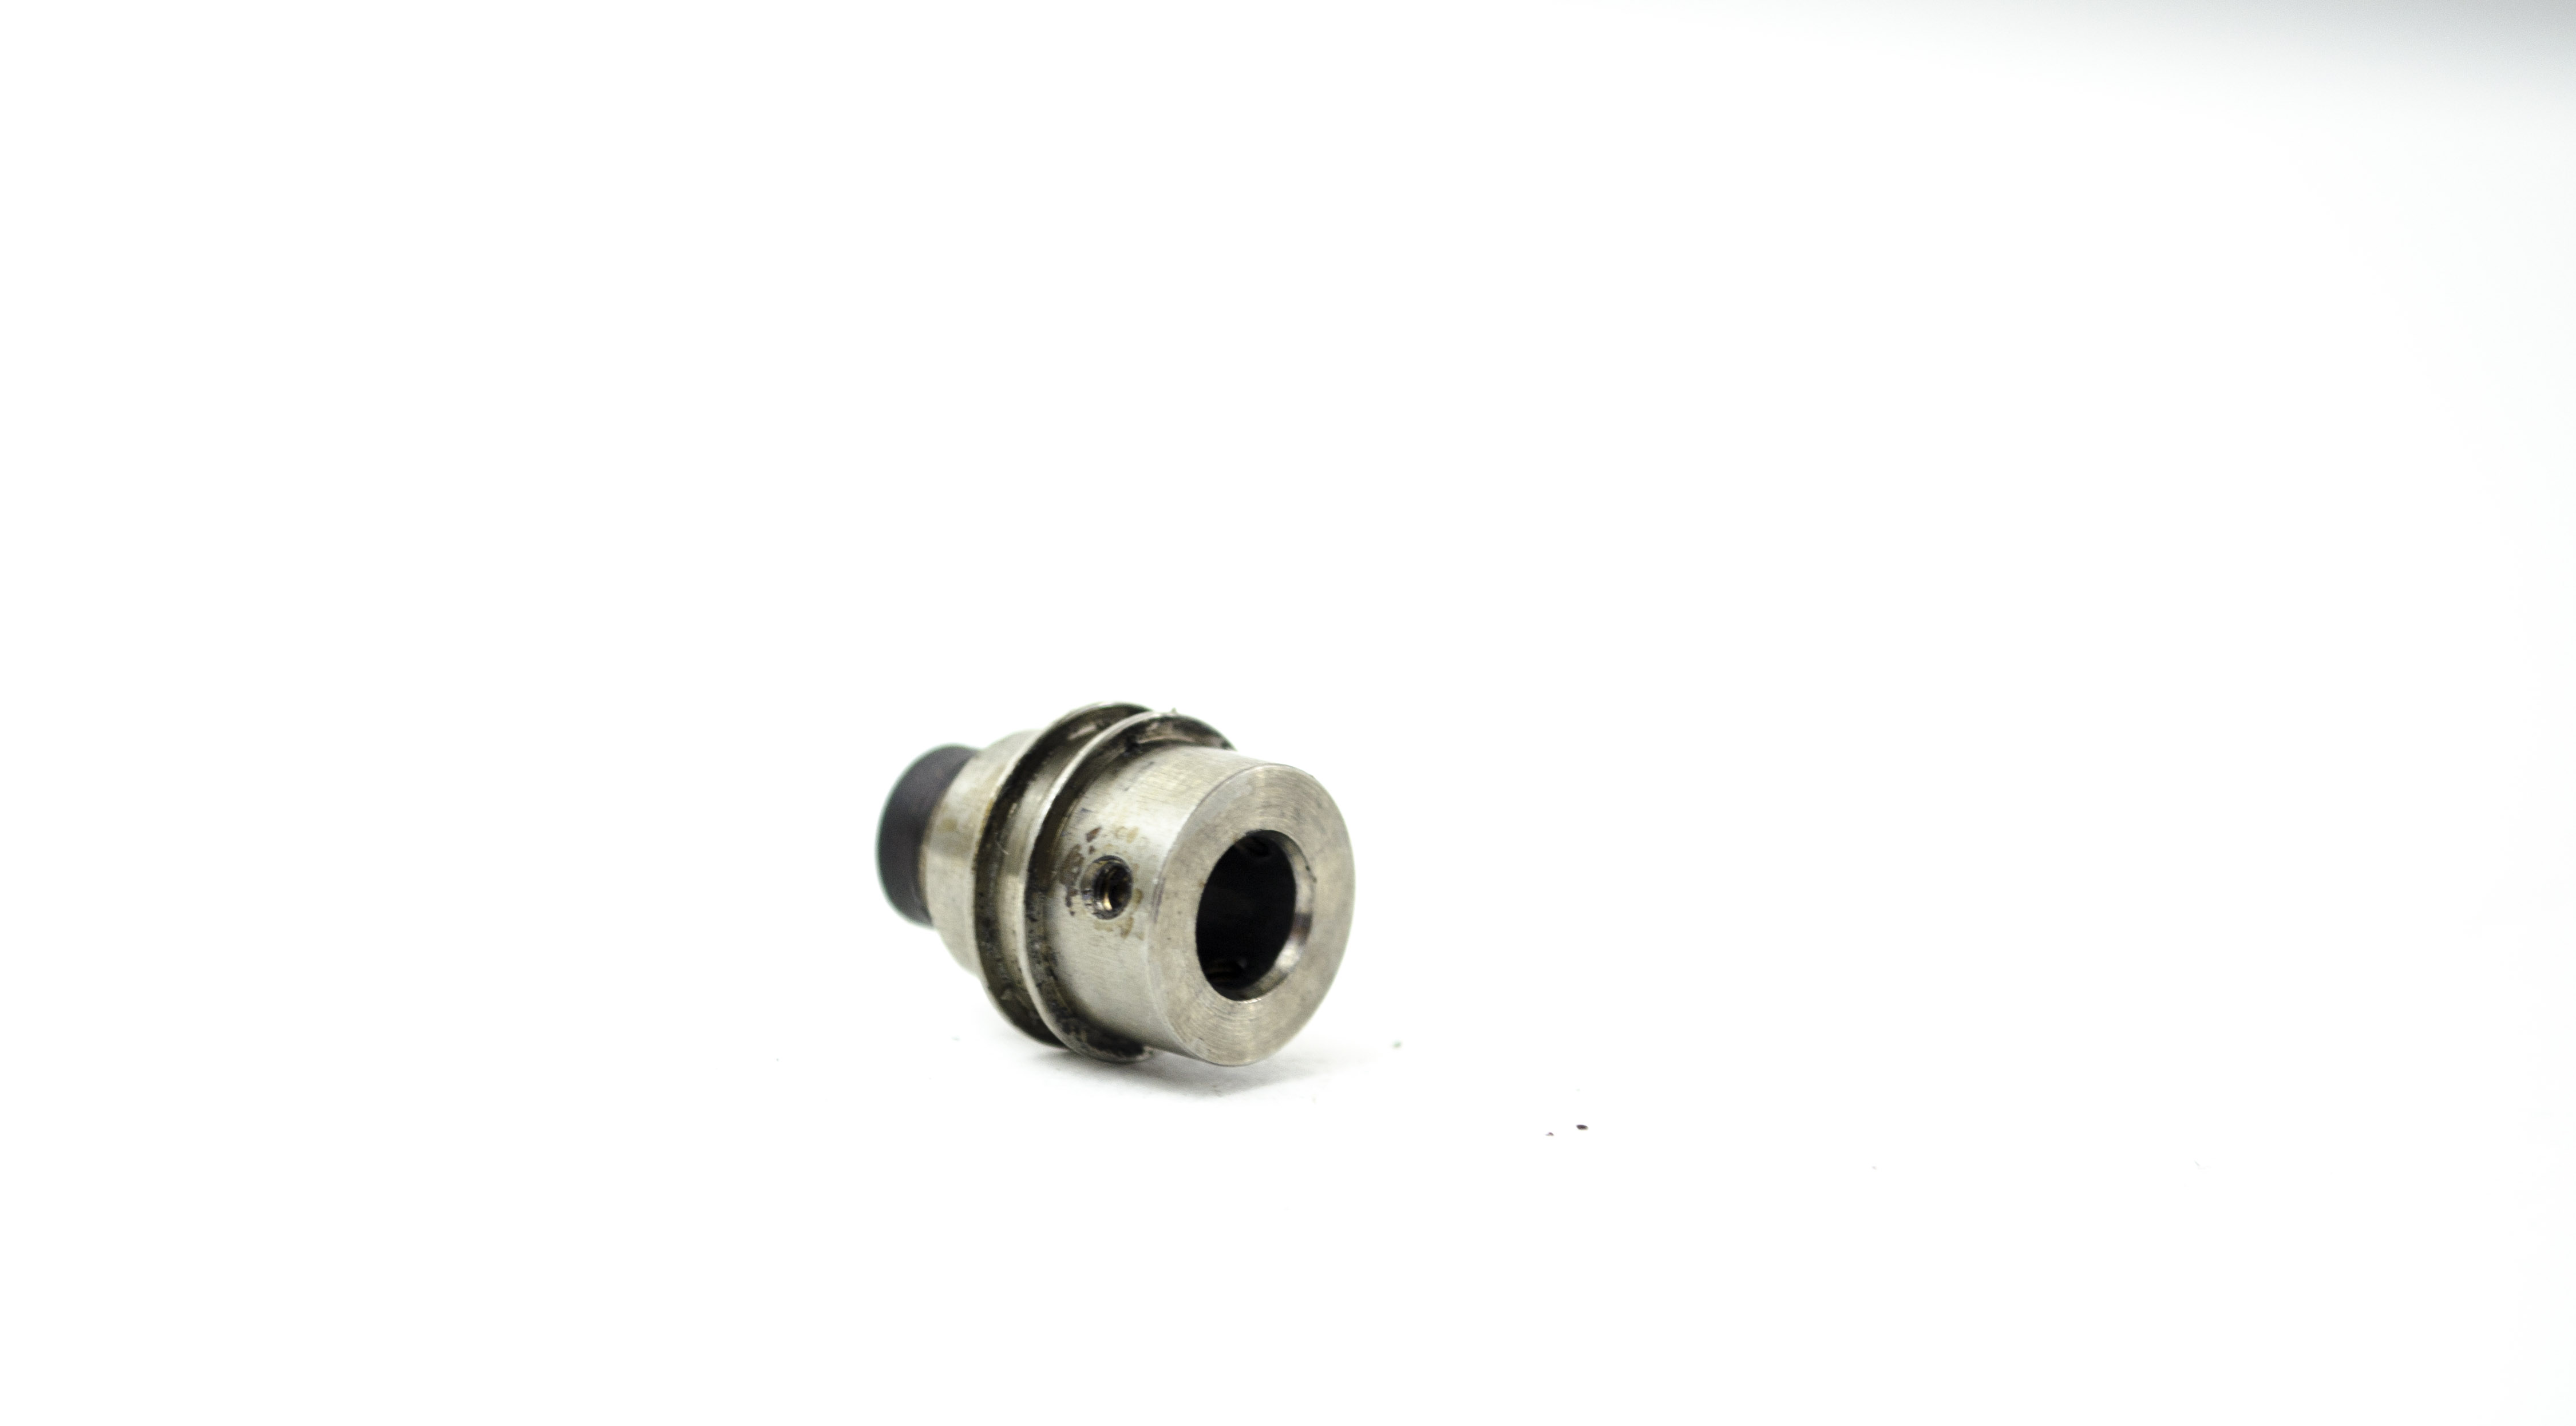 OEM Insertion Tube Proximal End Fitting - GIF-XP160